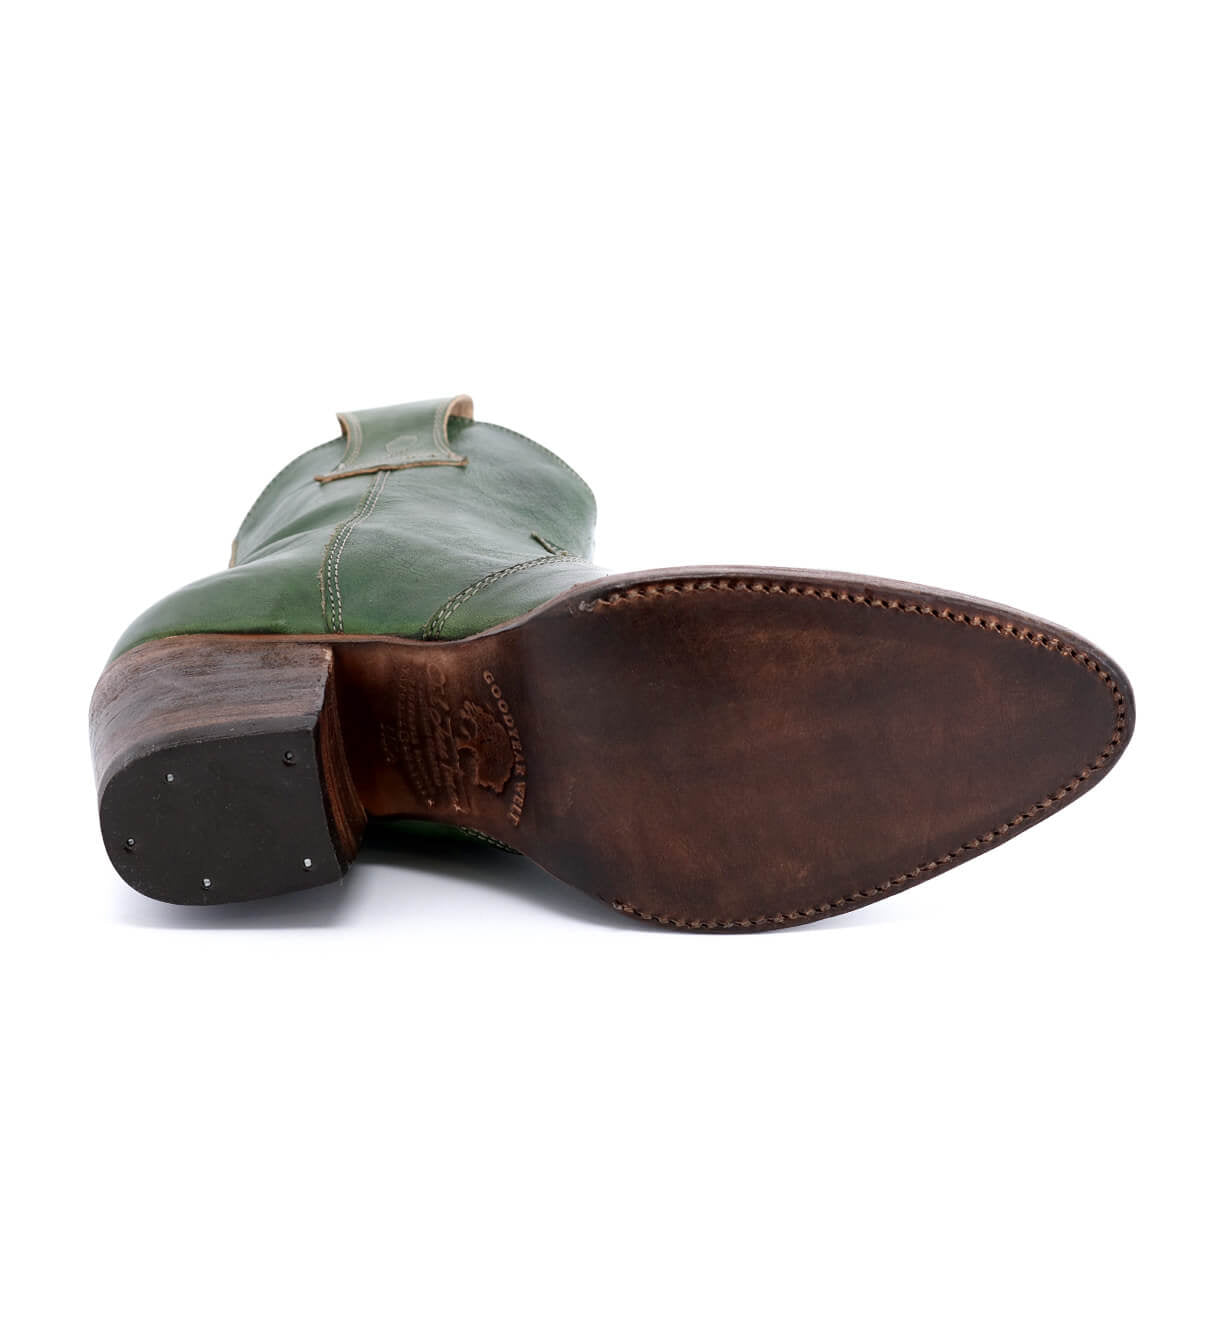 A pair of Baila green leather boots with Oak Tree Farms brown soles.